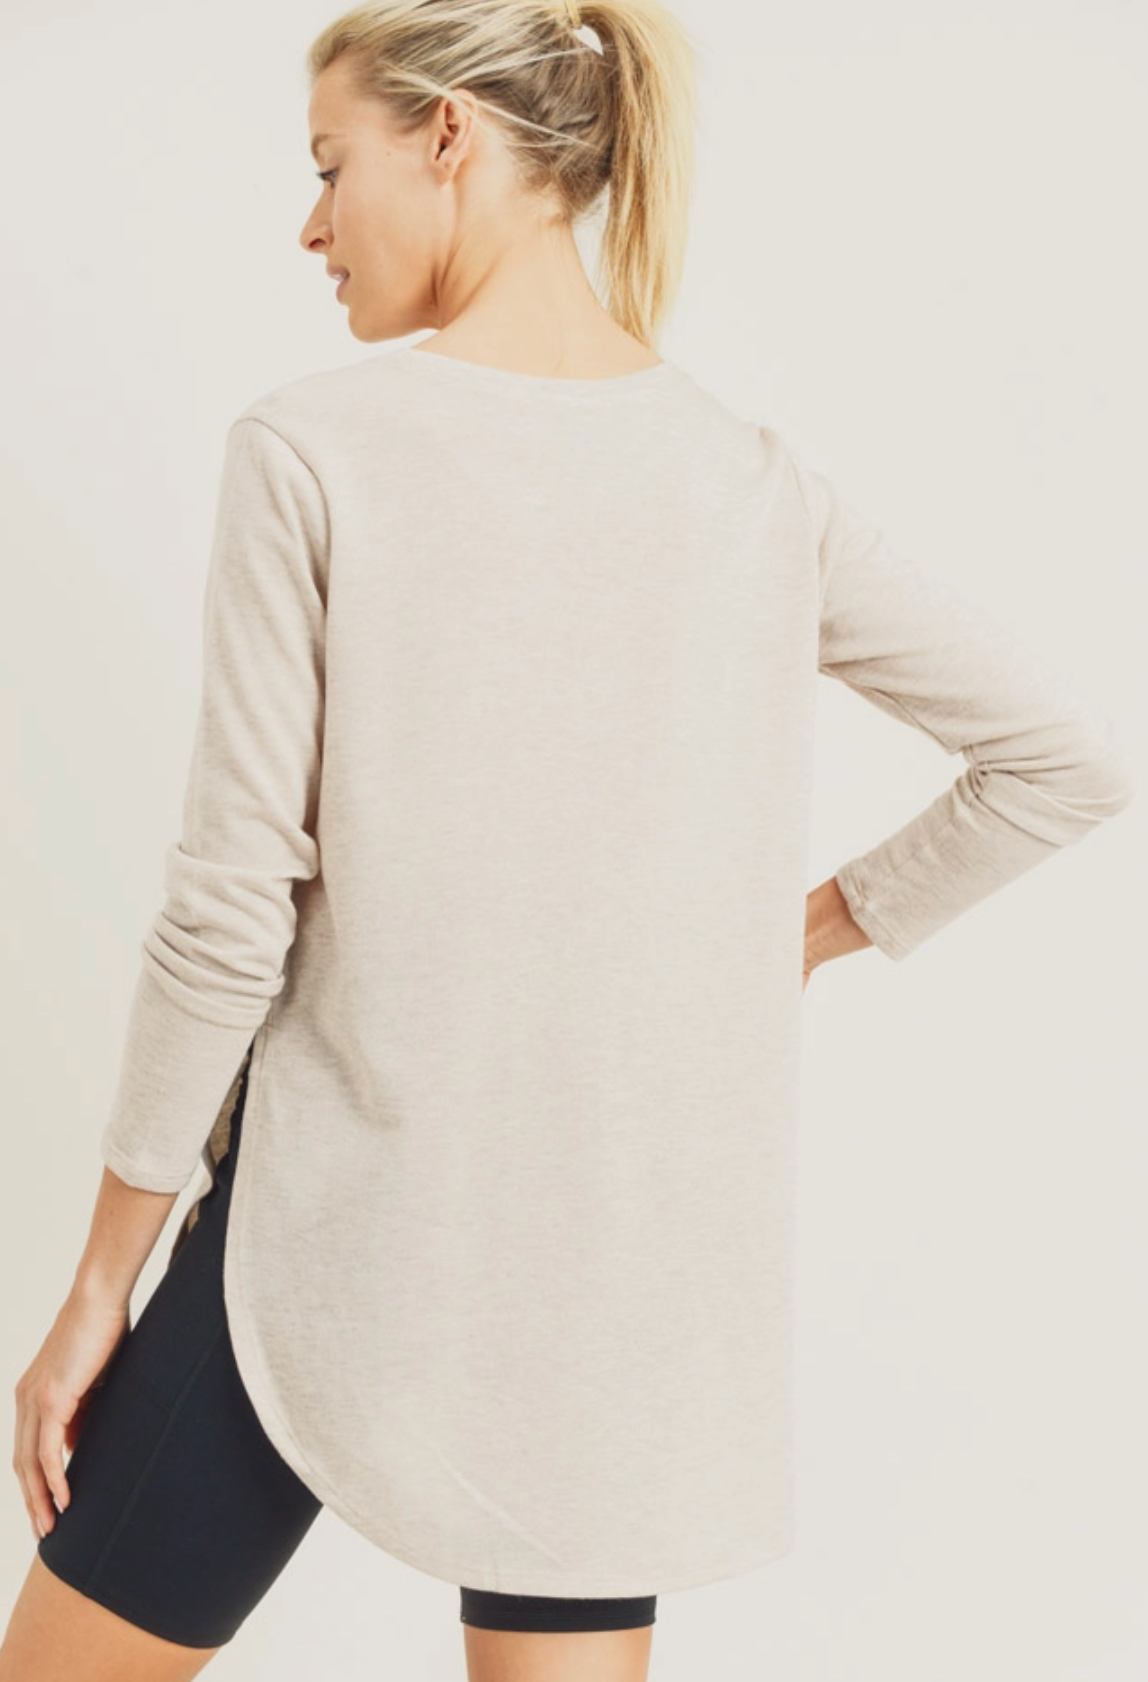 Long Sleeve Flow Top in Natural - The Street Boutique 